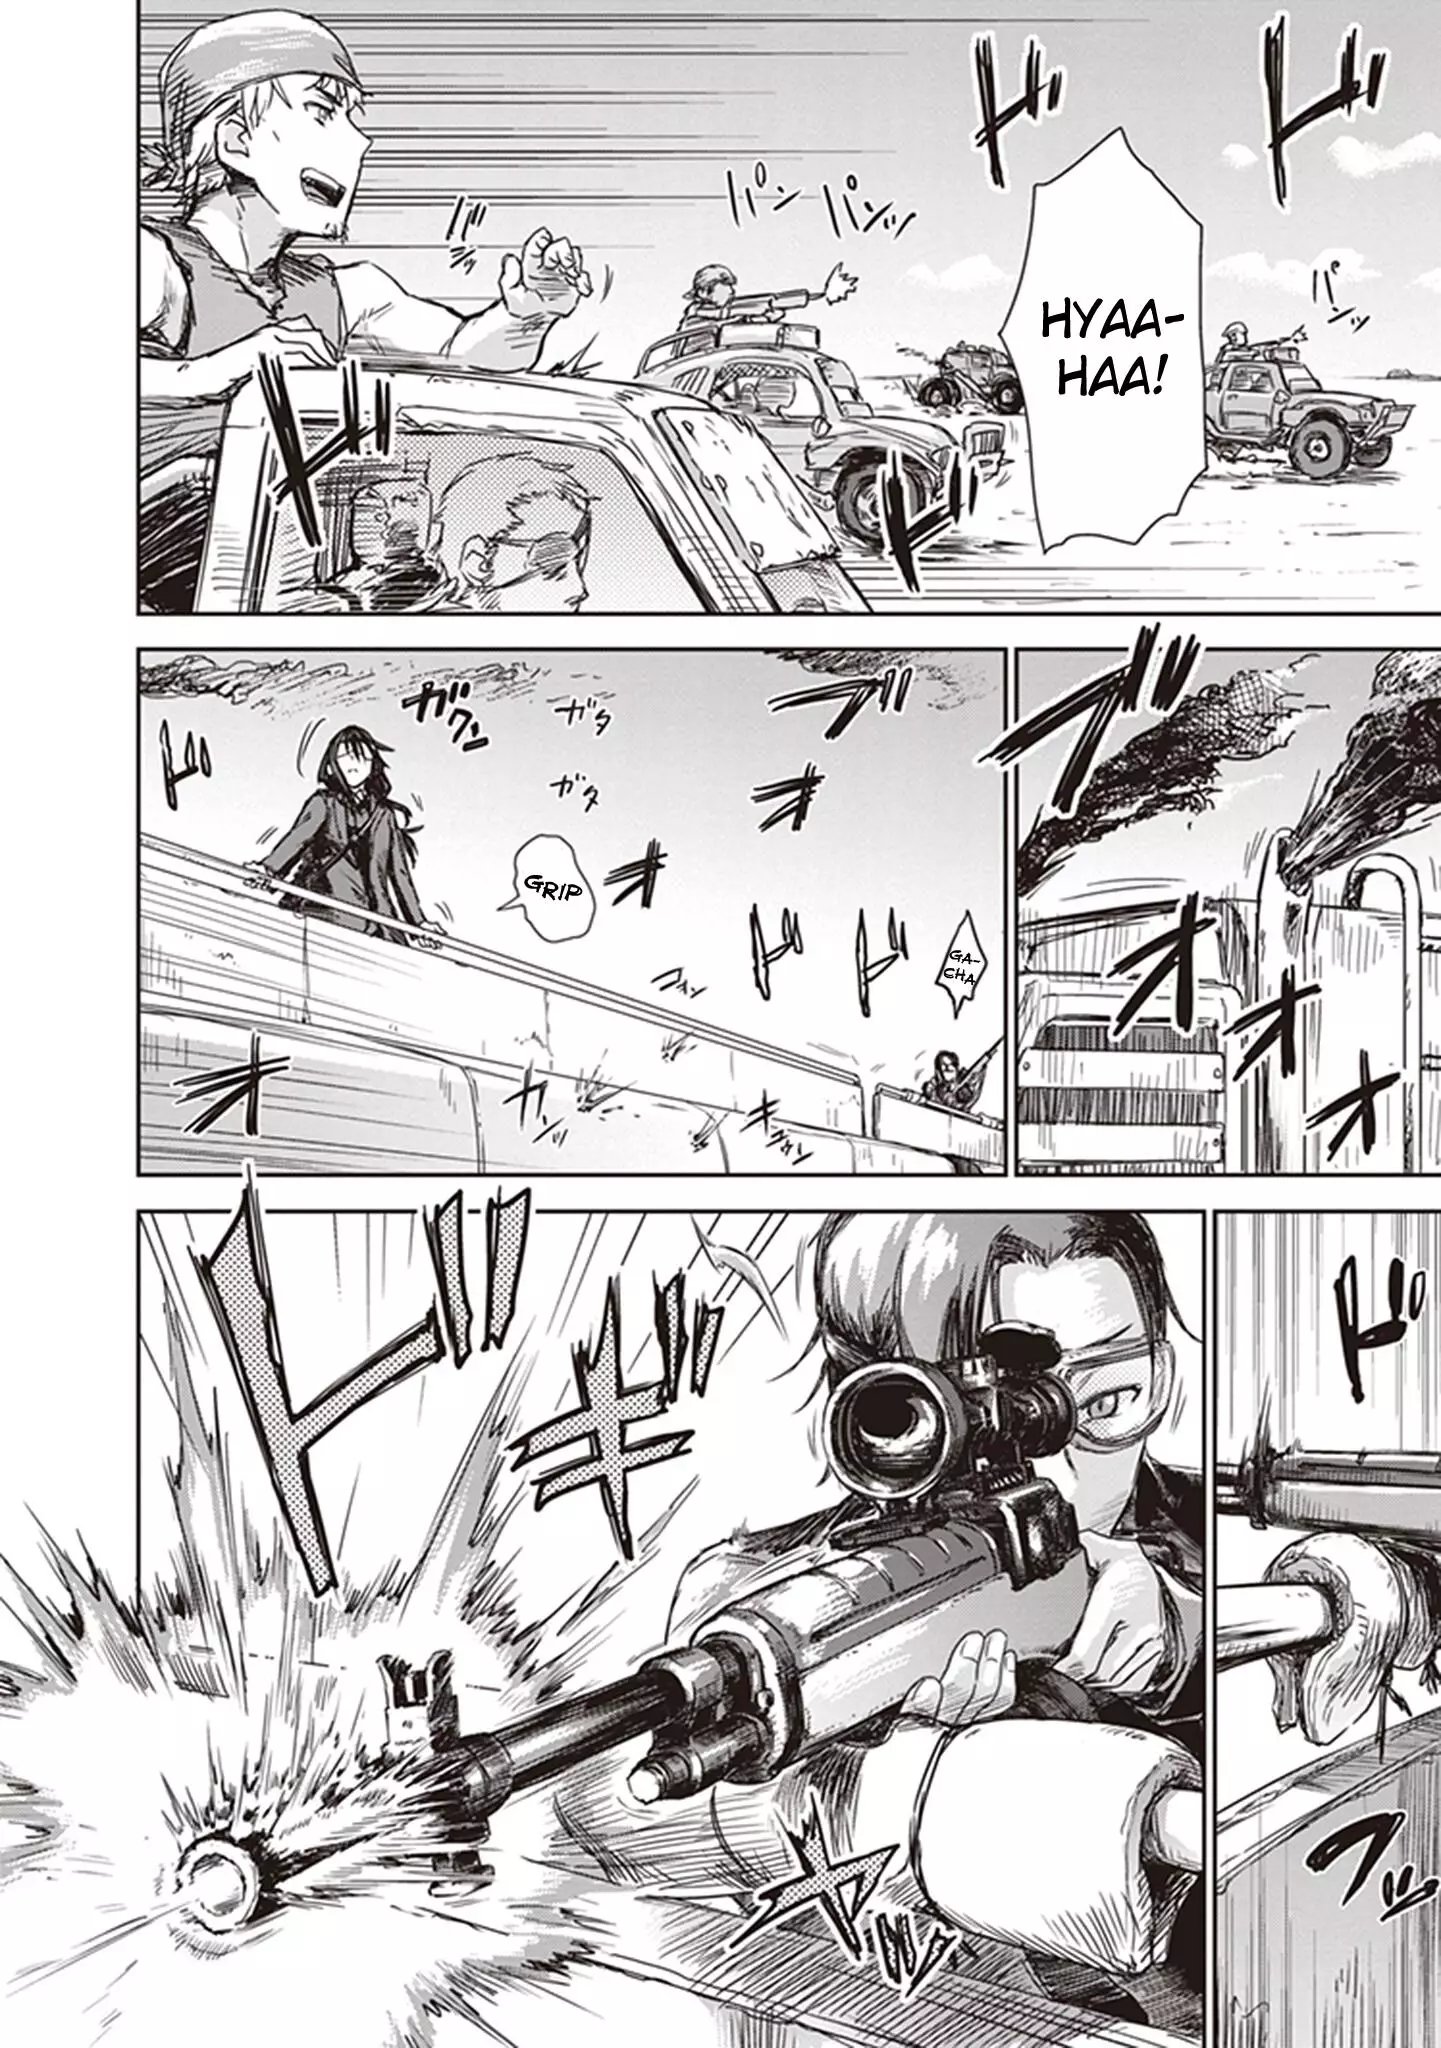 Kino's Journey (Gou) - 6 page 9-6ad4c9d8